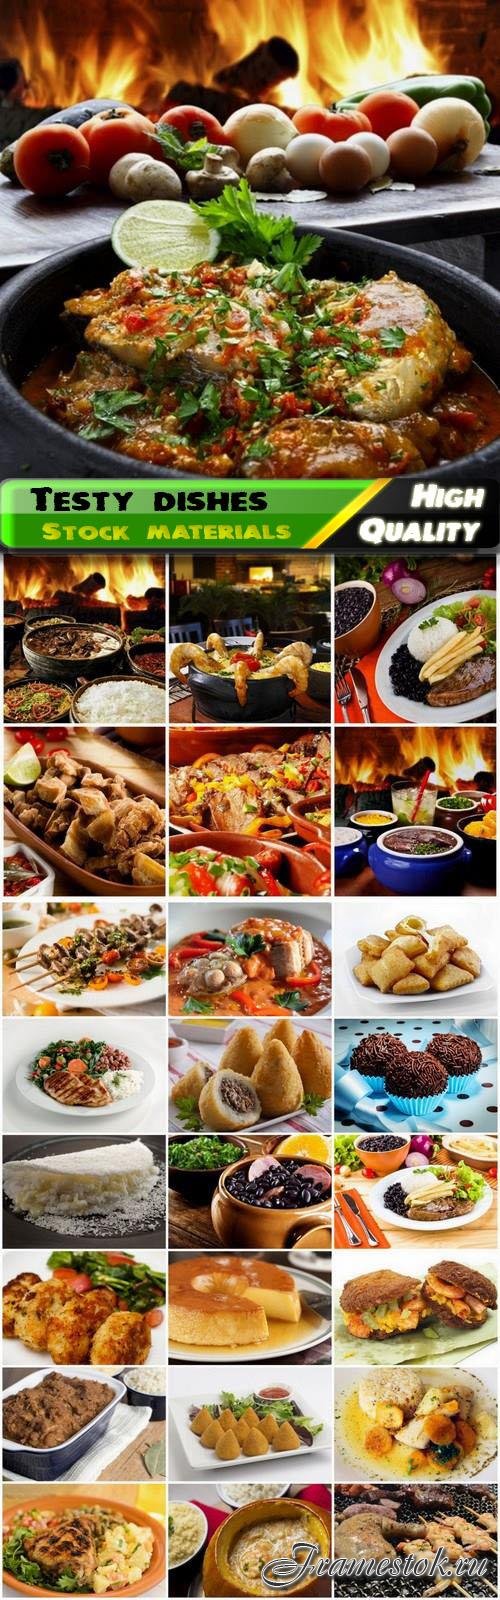 Tasty Indian and Brazilian dishes food 25 HQ Jpg